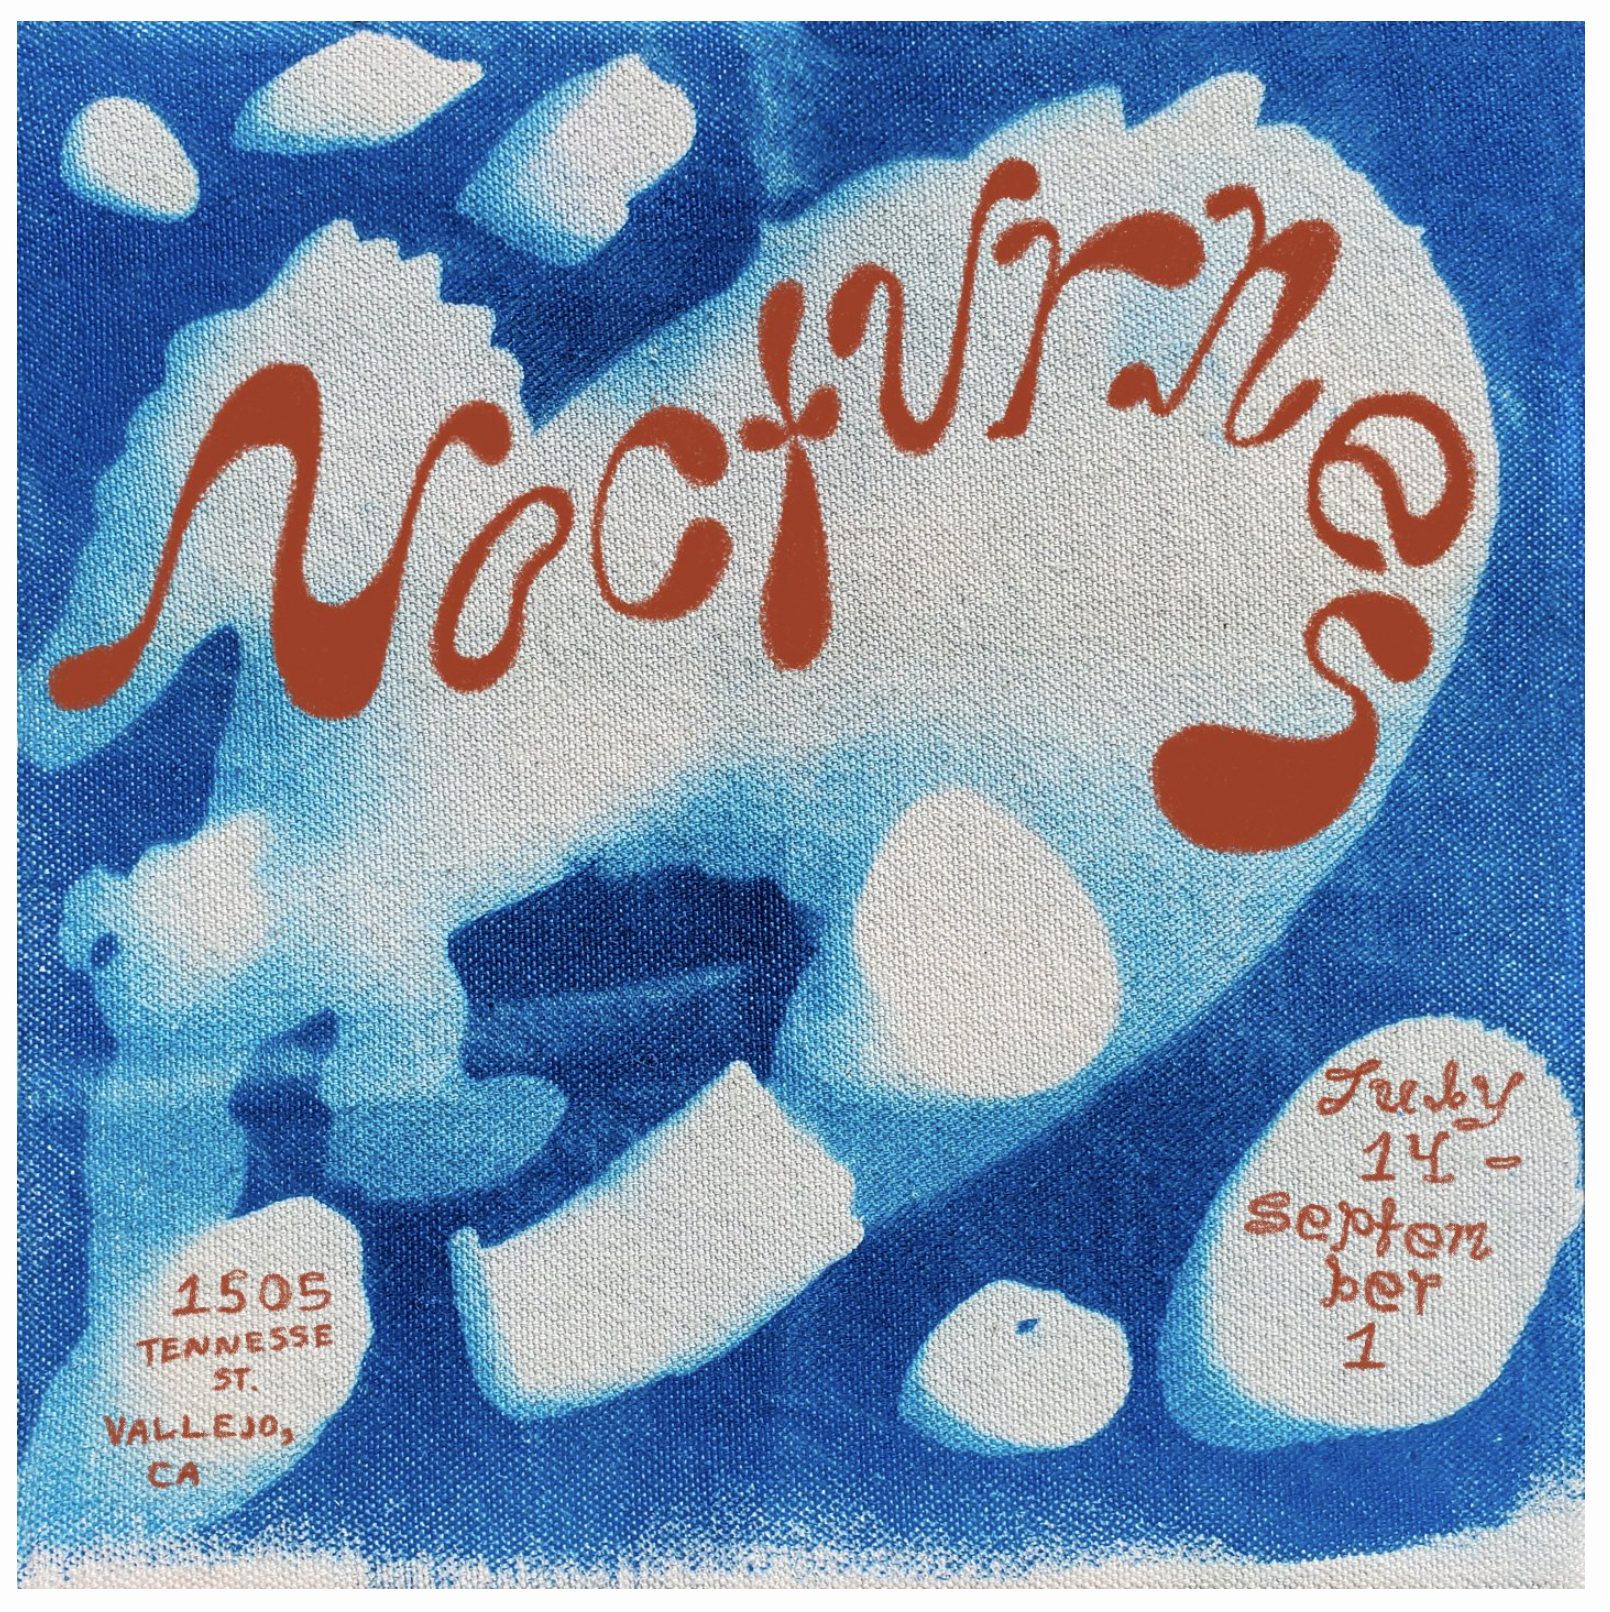 a flyer graphic made from a cyanotype fabric print - a white horse-like figure floating among shapes on a blue background. wavy red letters spell "Nocturnes. 1505 Tennesse St. Vallejo, CA. July 14 - September 1."